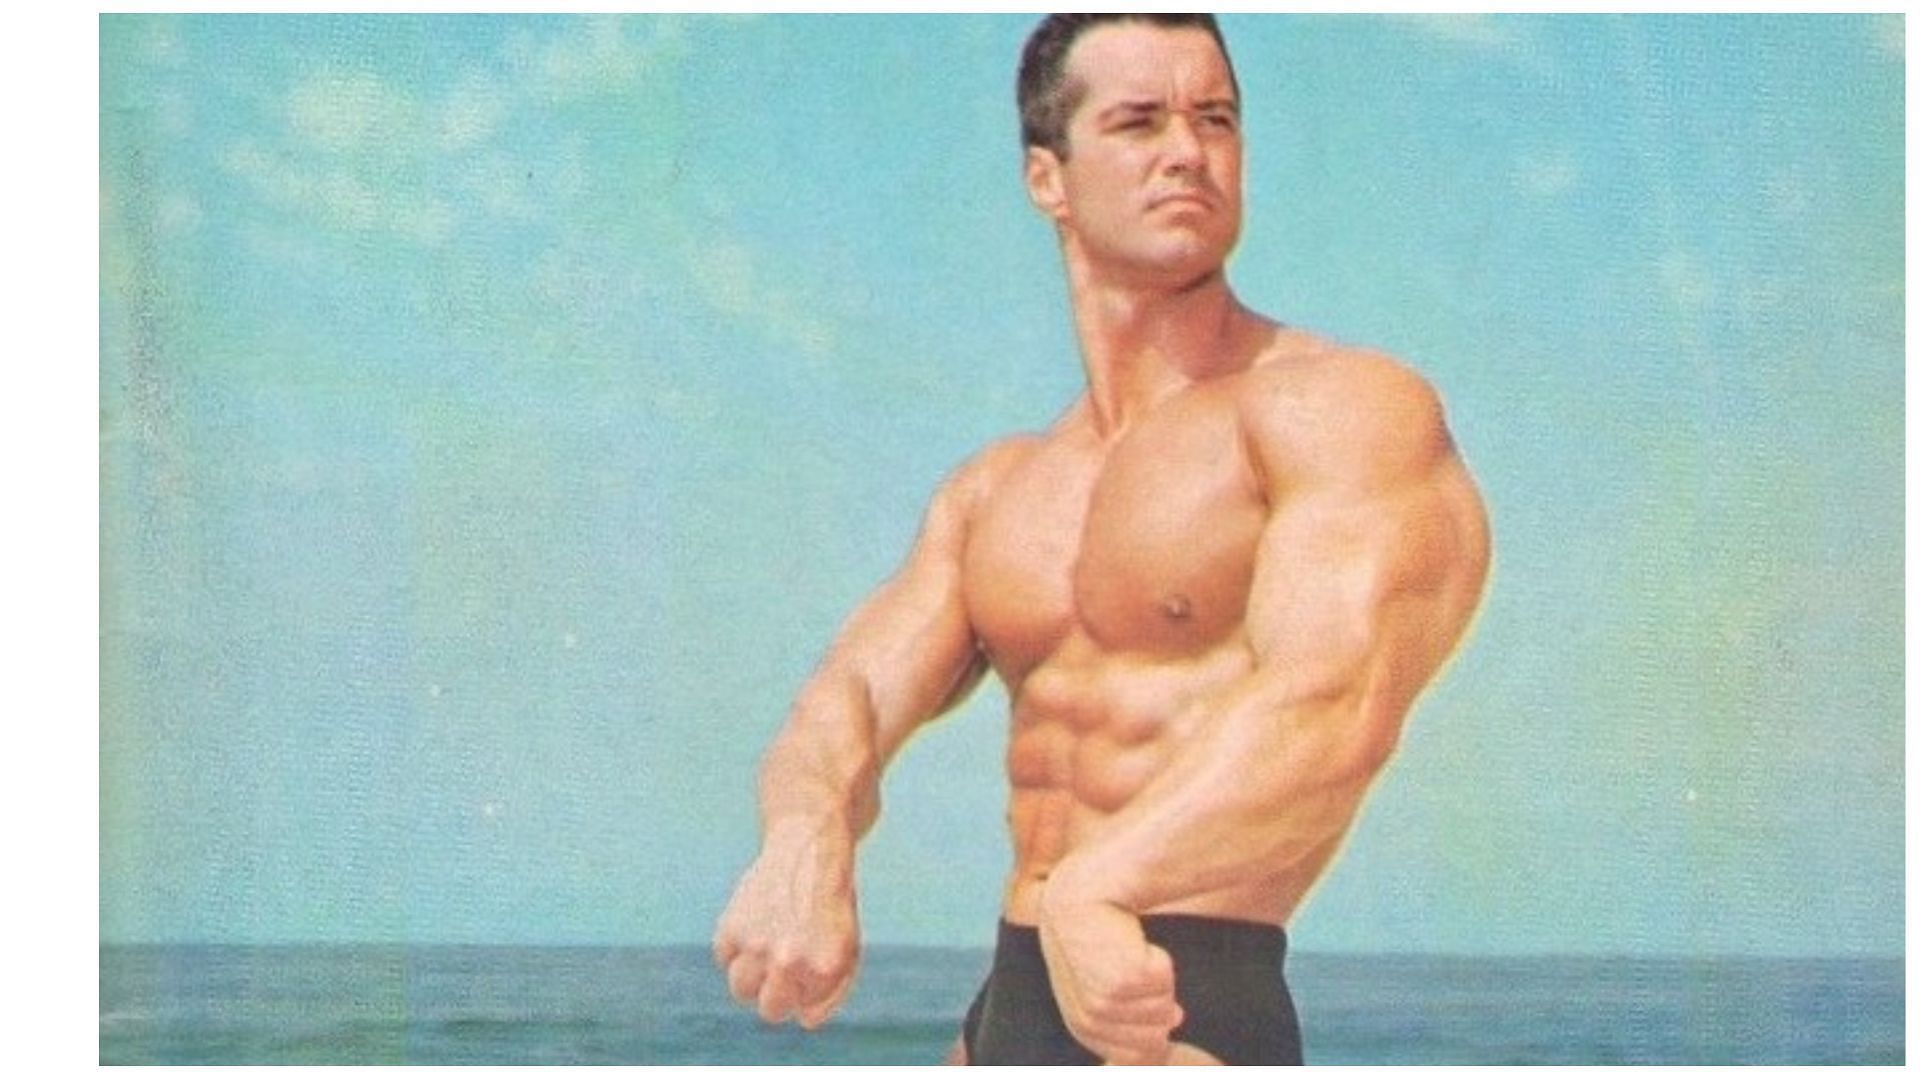 Chet Yorton defeated Arnold Schwarzenegger by winning the titles of Mr. America and Mr. Universe. (Image via Instagram)